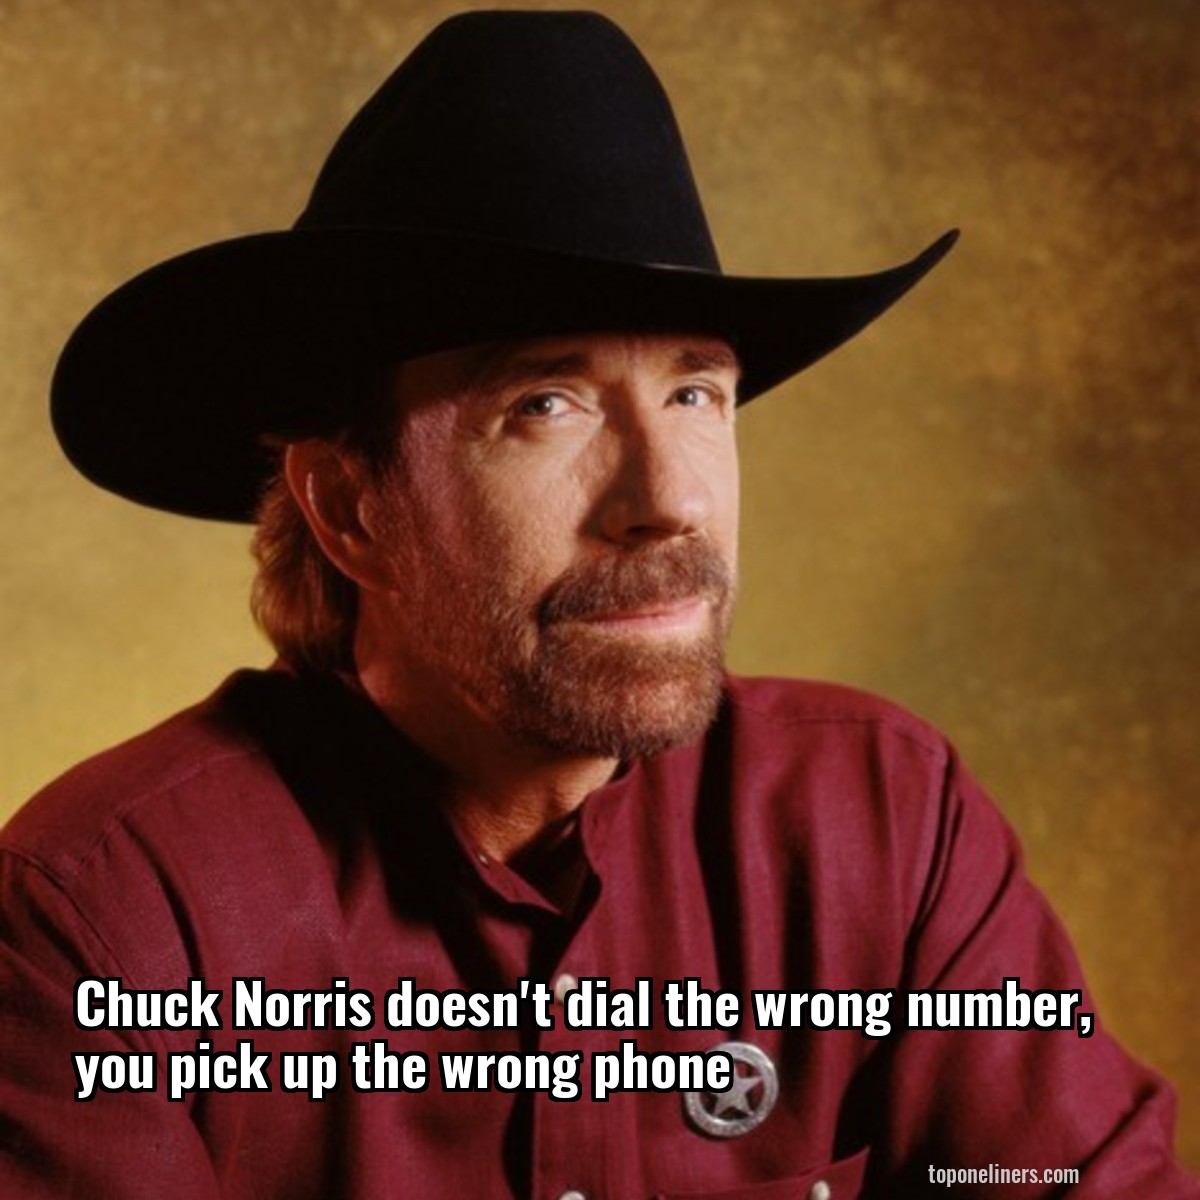 Chuck Norris doesn't dial the wrong number, you pick up the wrong phone